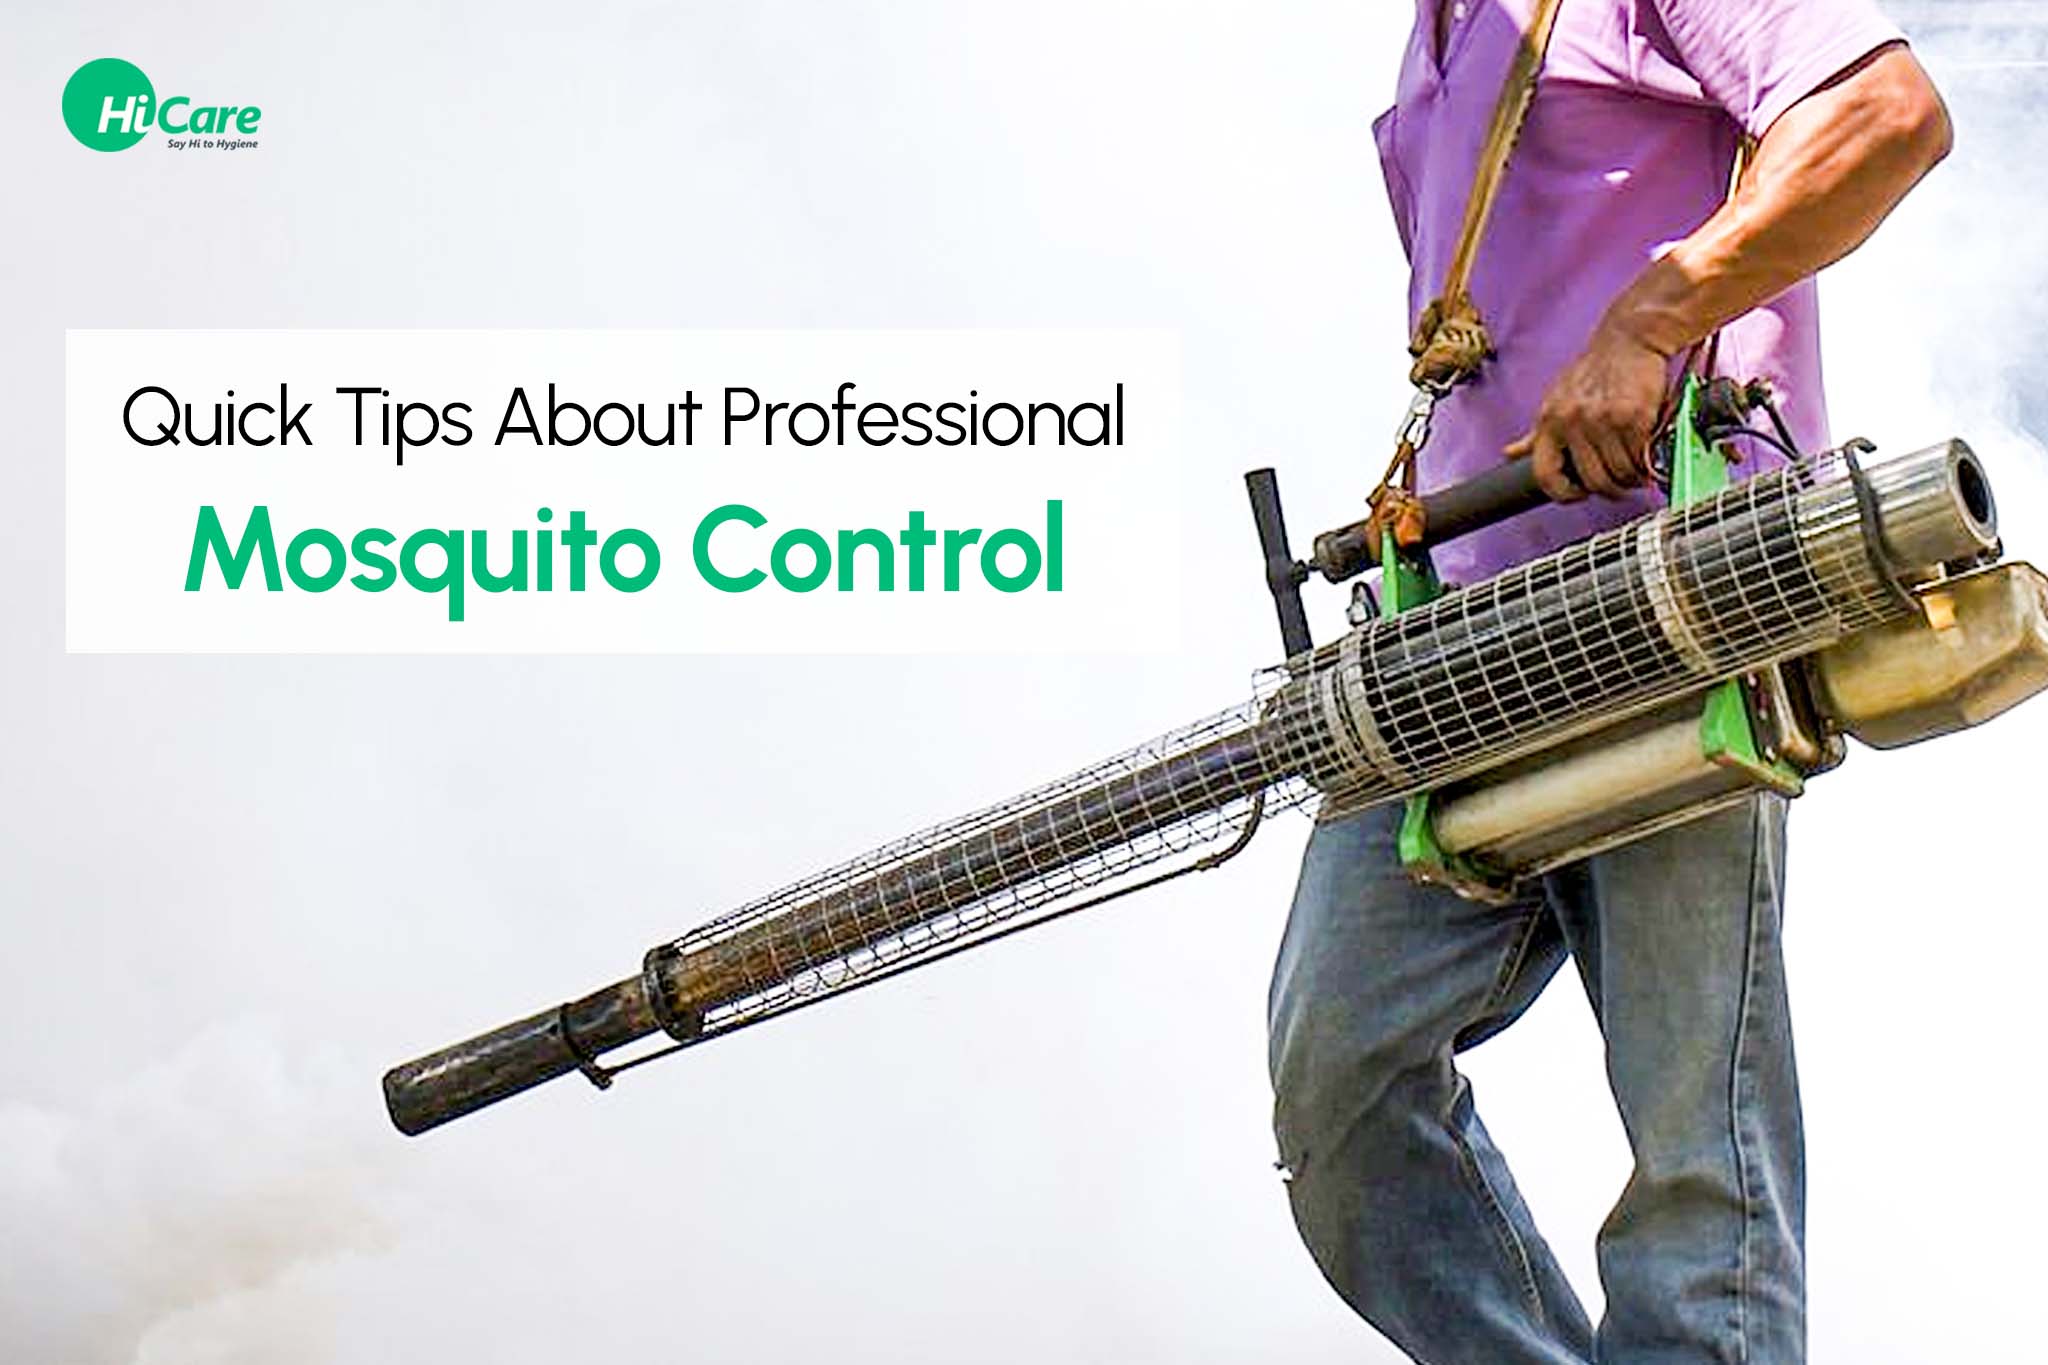 10 Quick Tips About Professional Mosquito Control